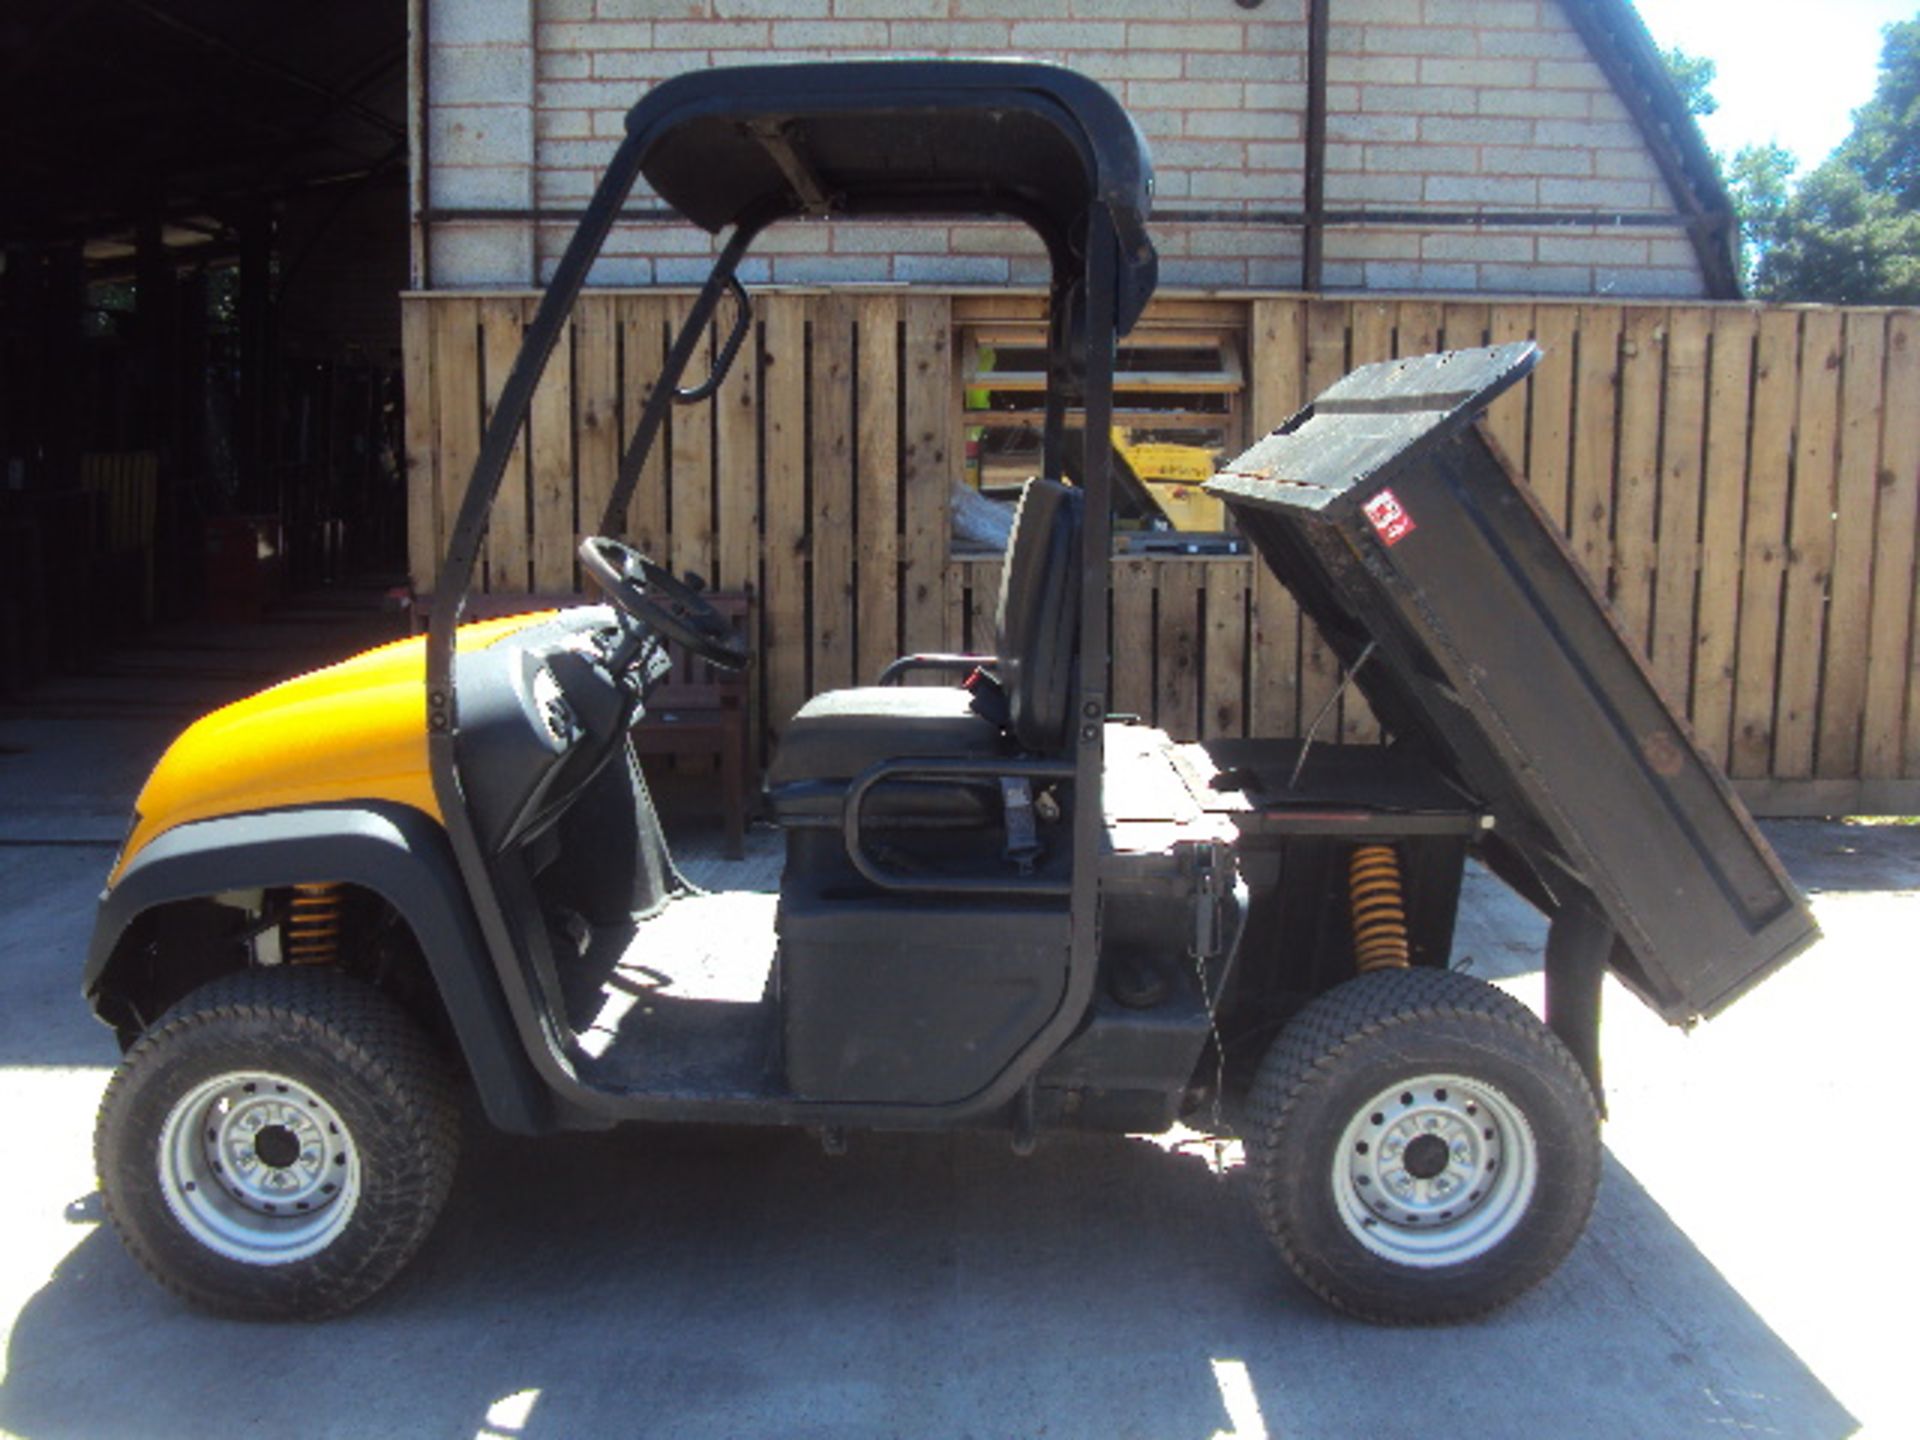 2012 JCB WORKMAX 4x4 diesel driven utility tipper S/n: E01630030 (223 recorded hours) with manual - Image 5 of 6